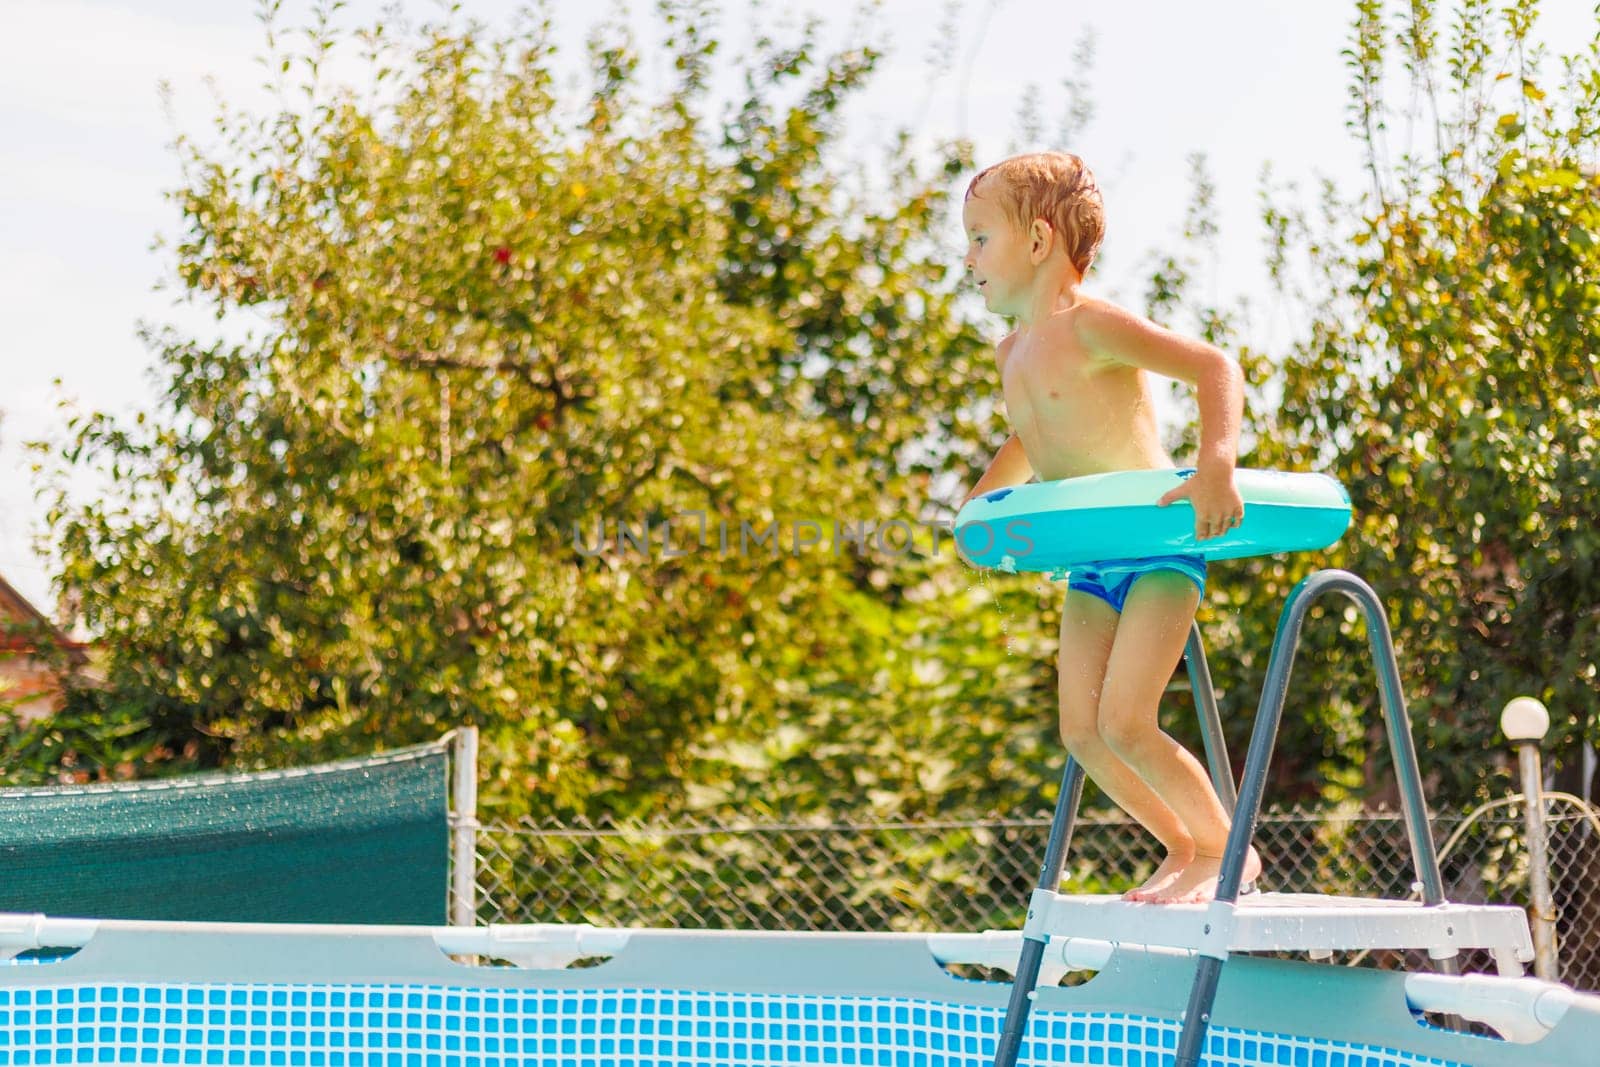 Excited young boy with a blue surfboard float preparing to jump into an above-ground pool on a sunny summer day, surrounded by greenery.